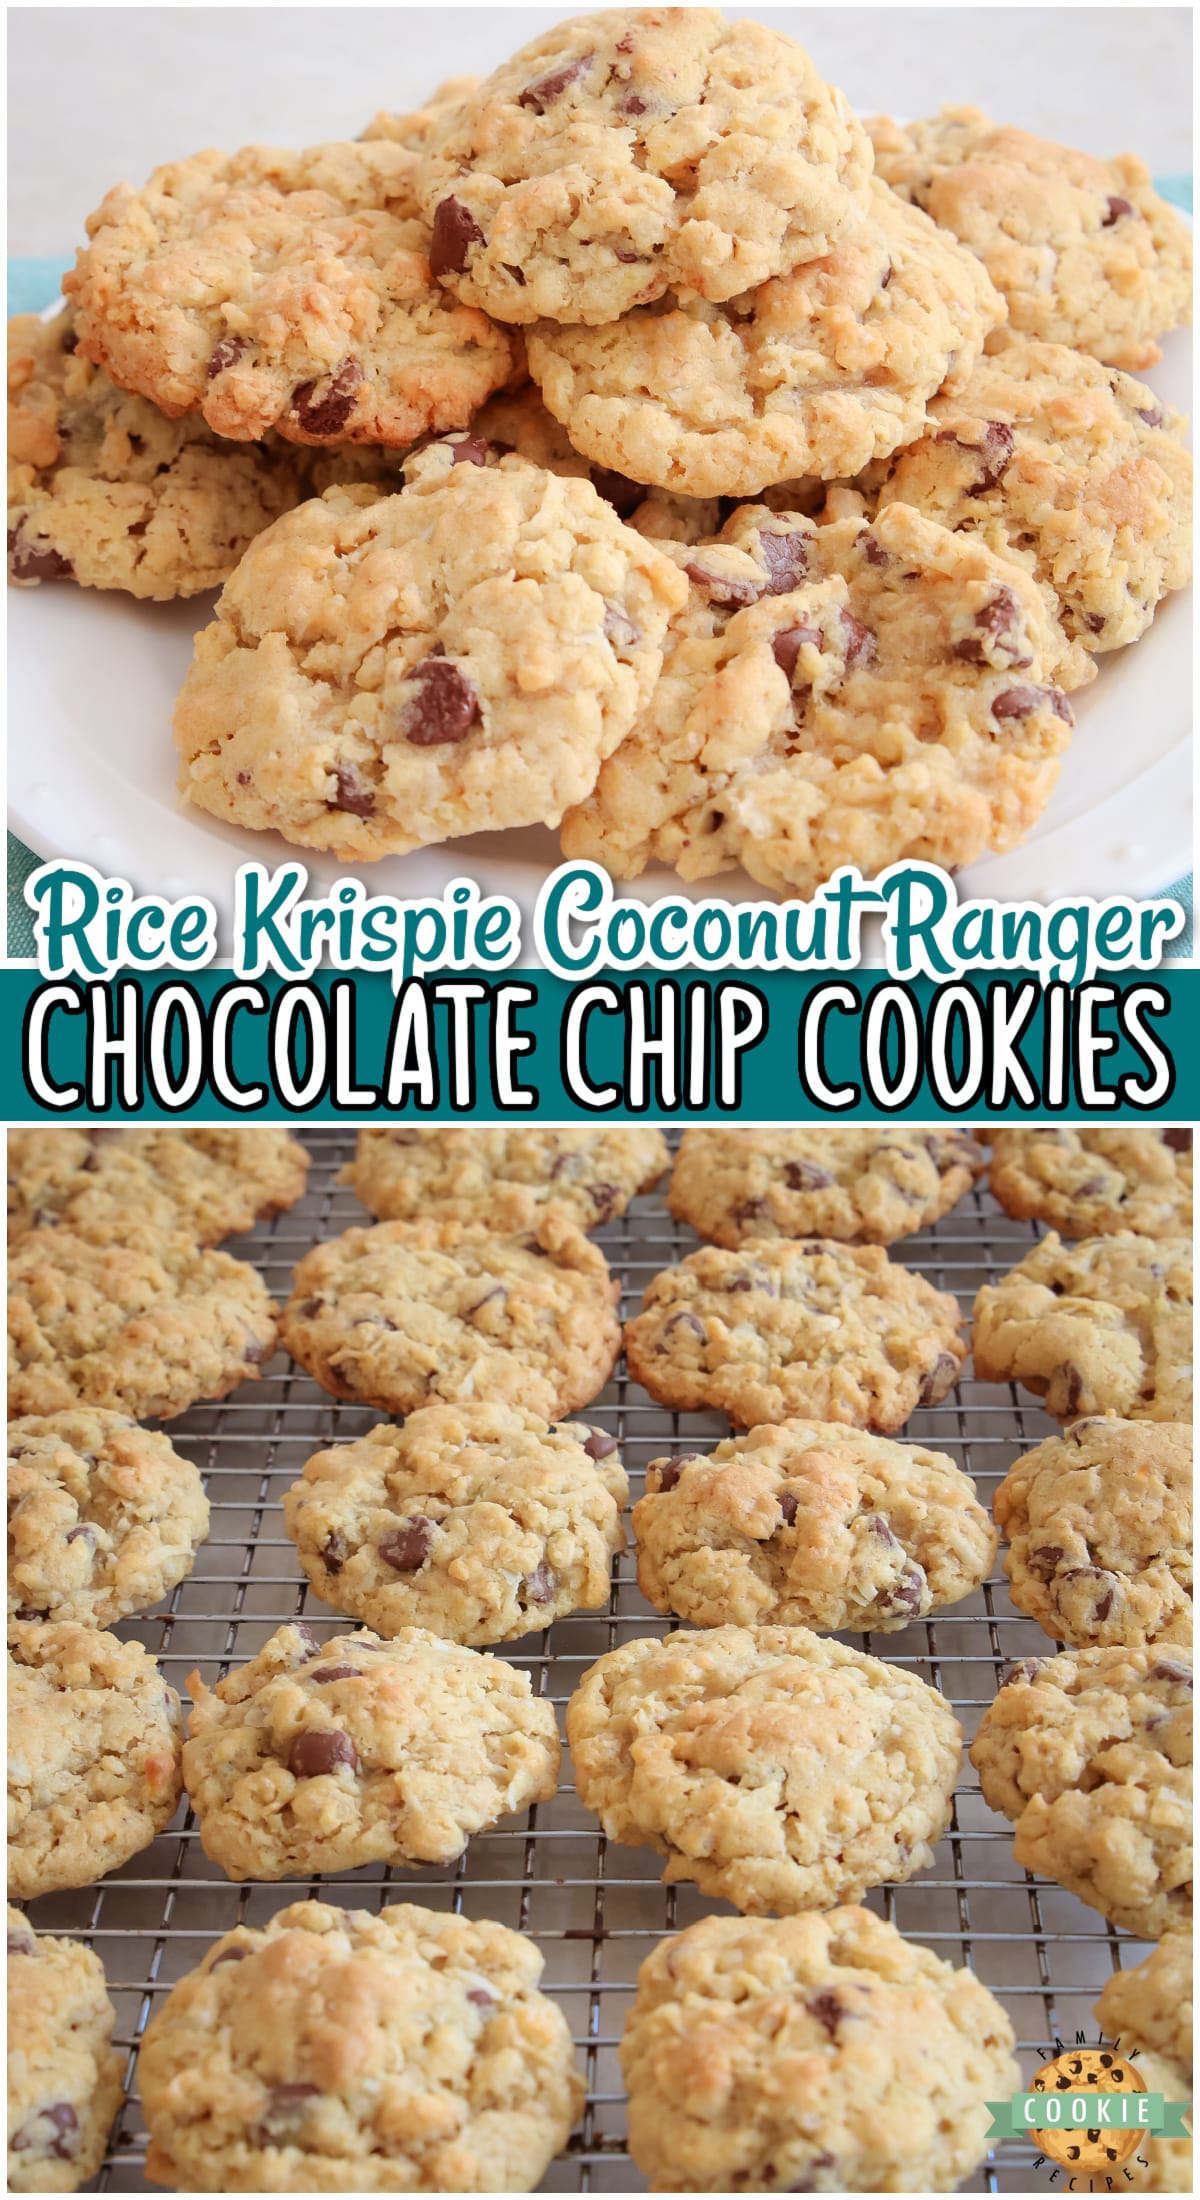 Chocolate Chip Ranger Cookies are a classic treat that combines oats, krispie cereal, coconut & chocolate chips to create a deliciously chewy cookie!